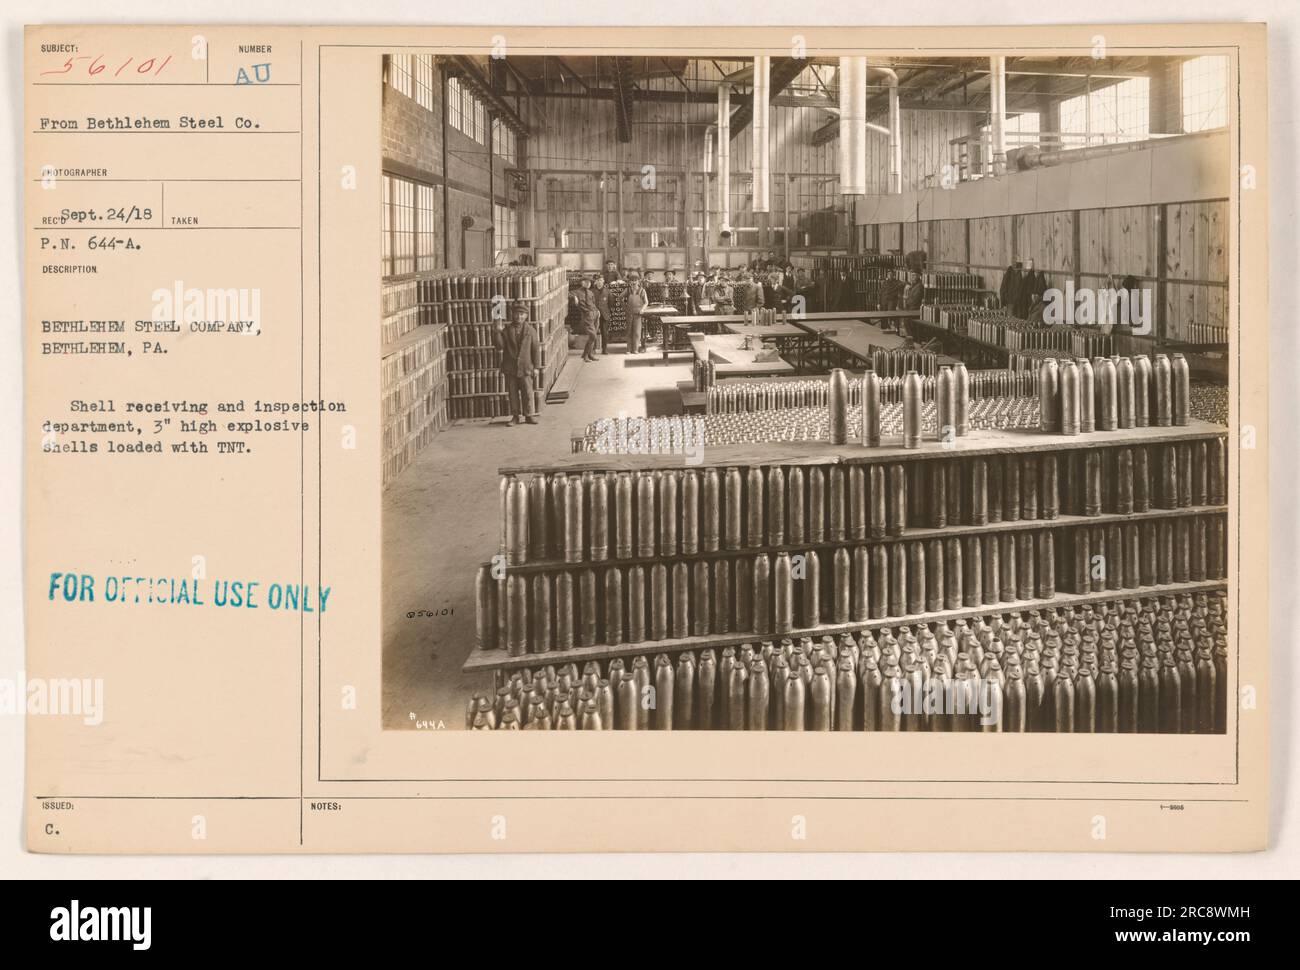 In the photograph, taken by the photographer of Bethlehem Steel Company on September 24, 1918, at Bethlehem, PA, the shell receiving and inspection department is shown. The image depicts 3' high explosive shells loaded with TNT. The photograph is labeled as 'FOR OFFICIAL USE ONLY' and bears the issue 'C. NOTES' as additional information. Stock Photo